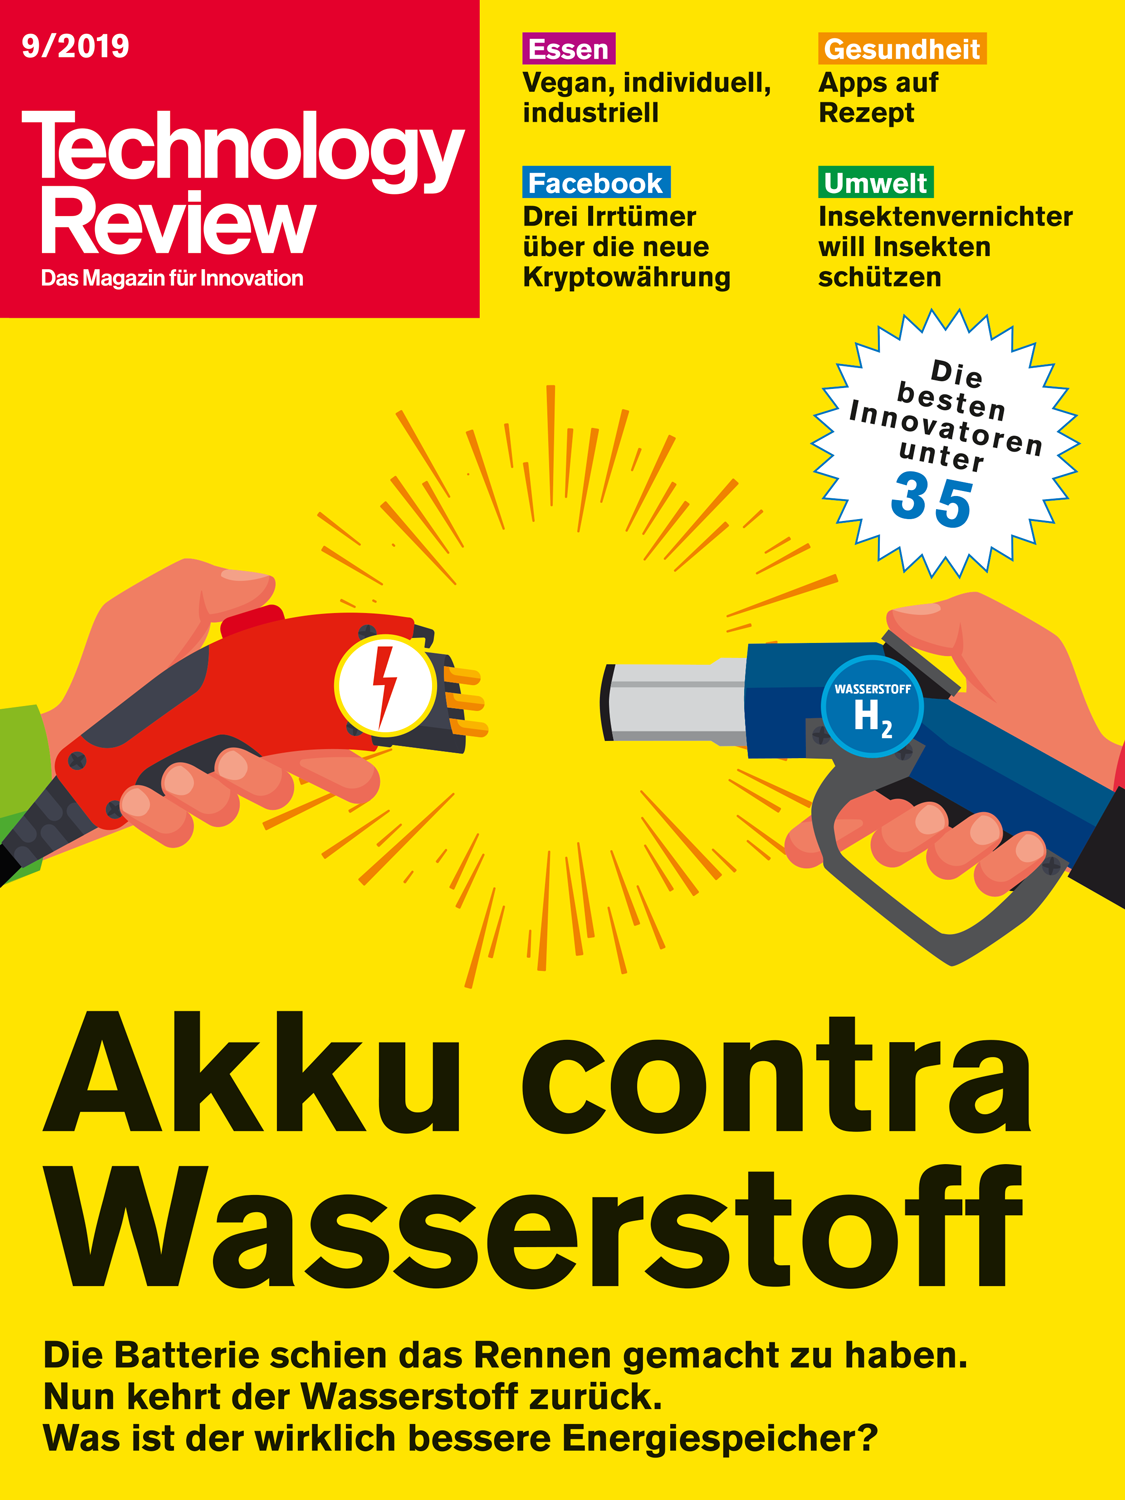 Technology Review 09/2019